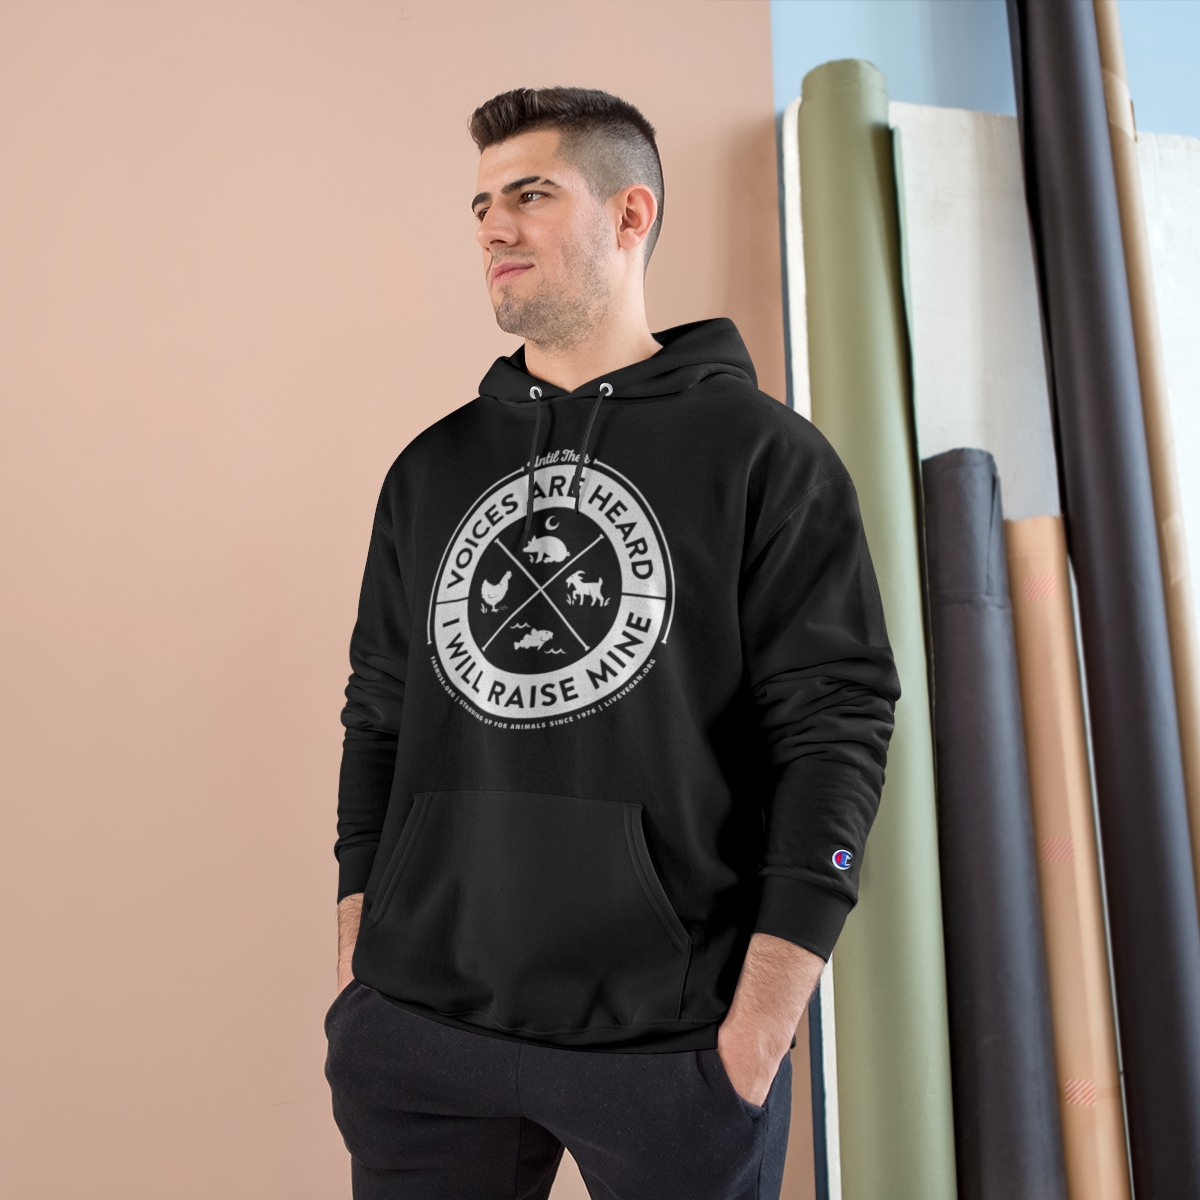 Until Their Voices: Champion Hoodie product thumbnail image